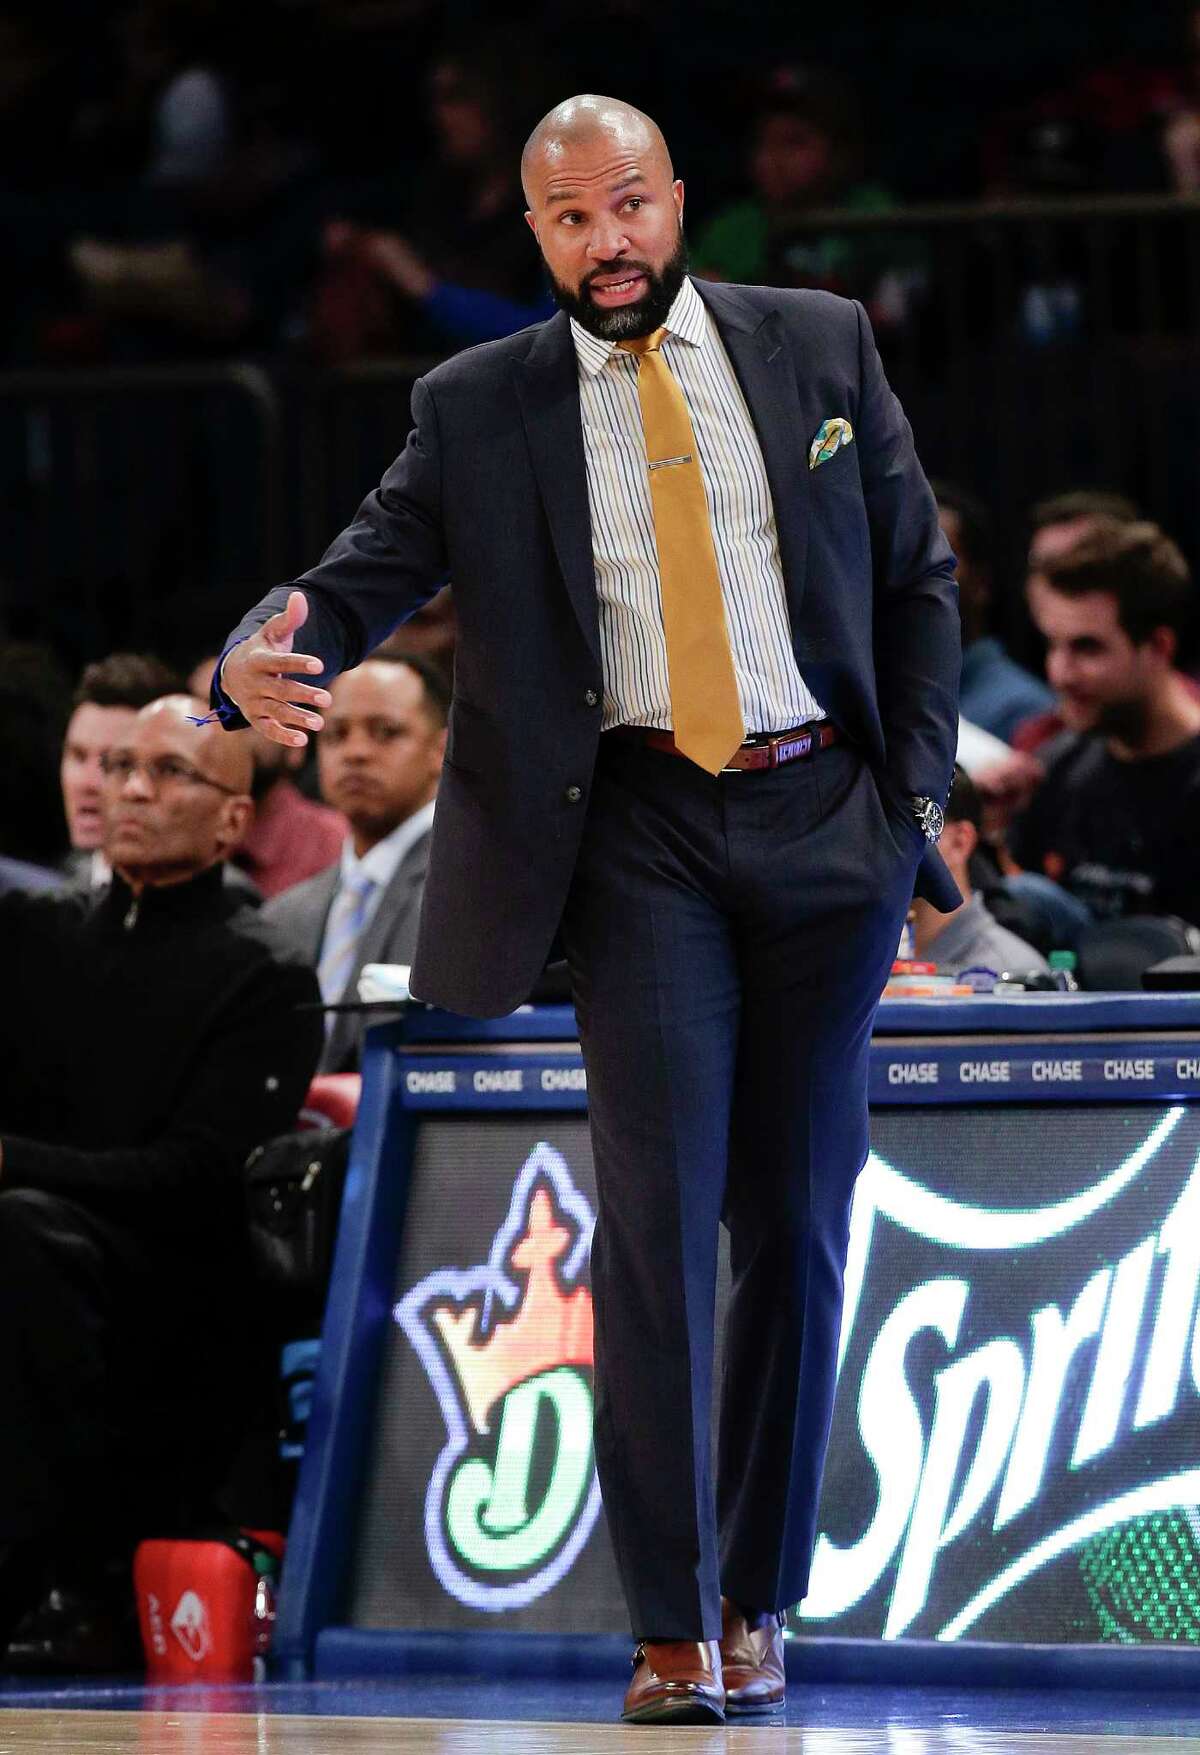 Knicks head coach Derek Fisher motions to a referee during the second quarter of a preseason game against Paschoalotto Bauru on Wednesday in New York.